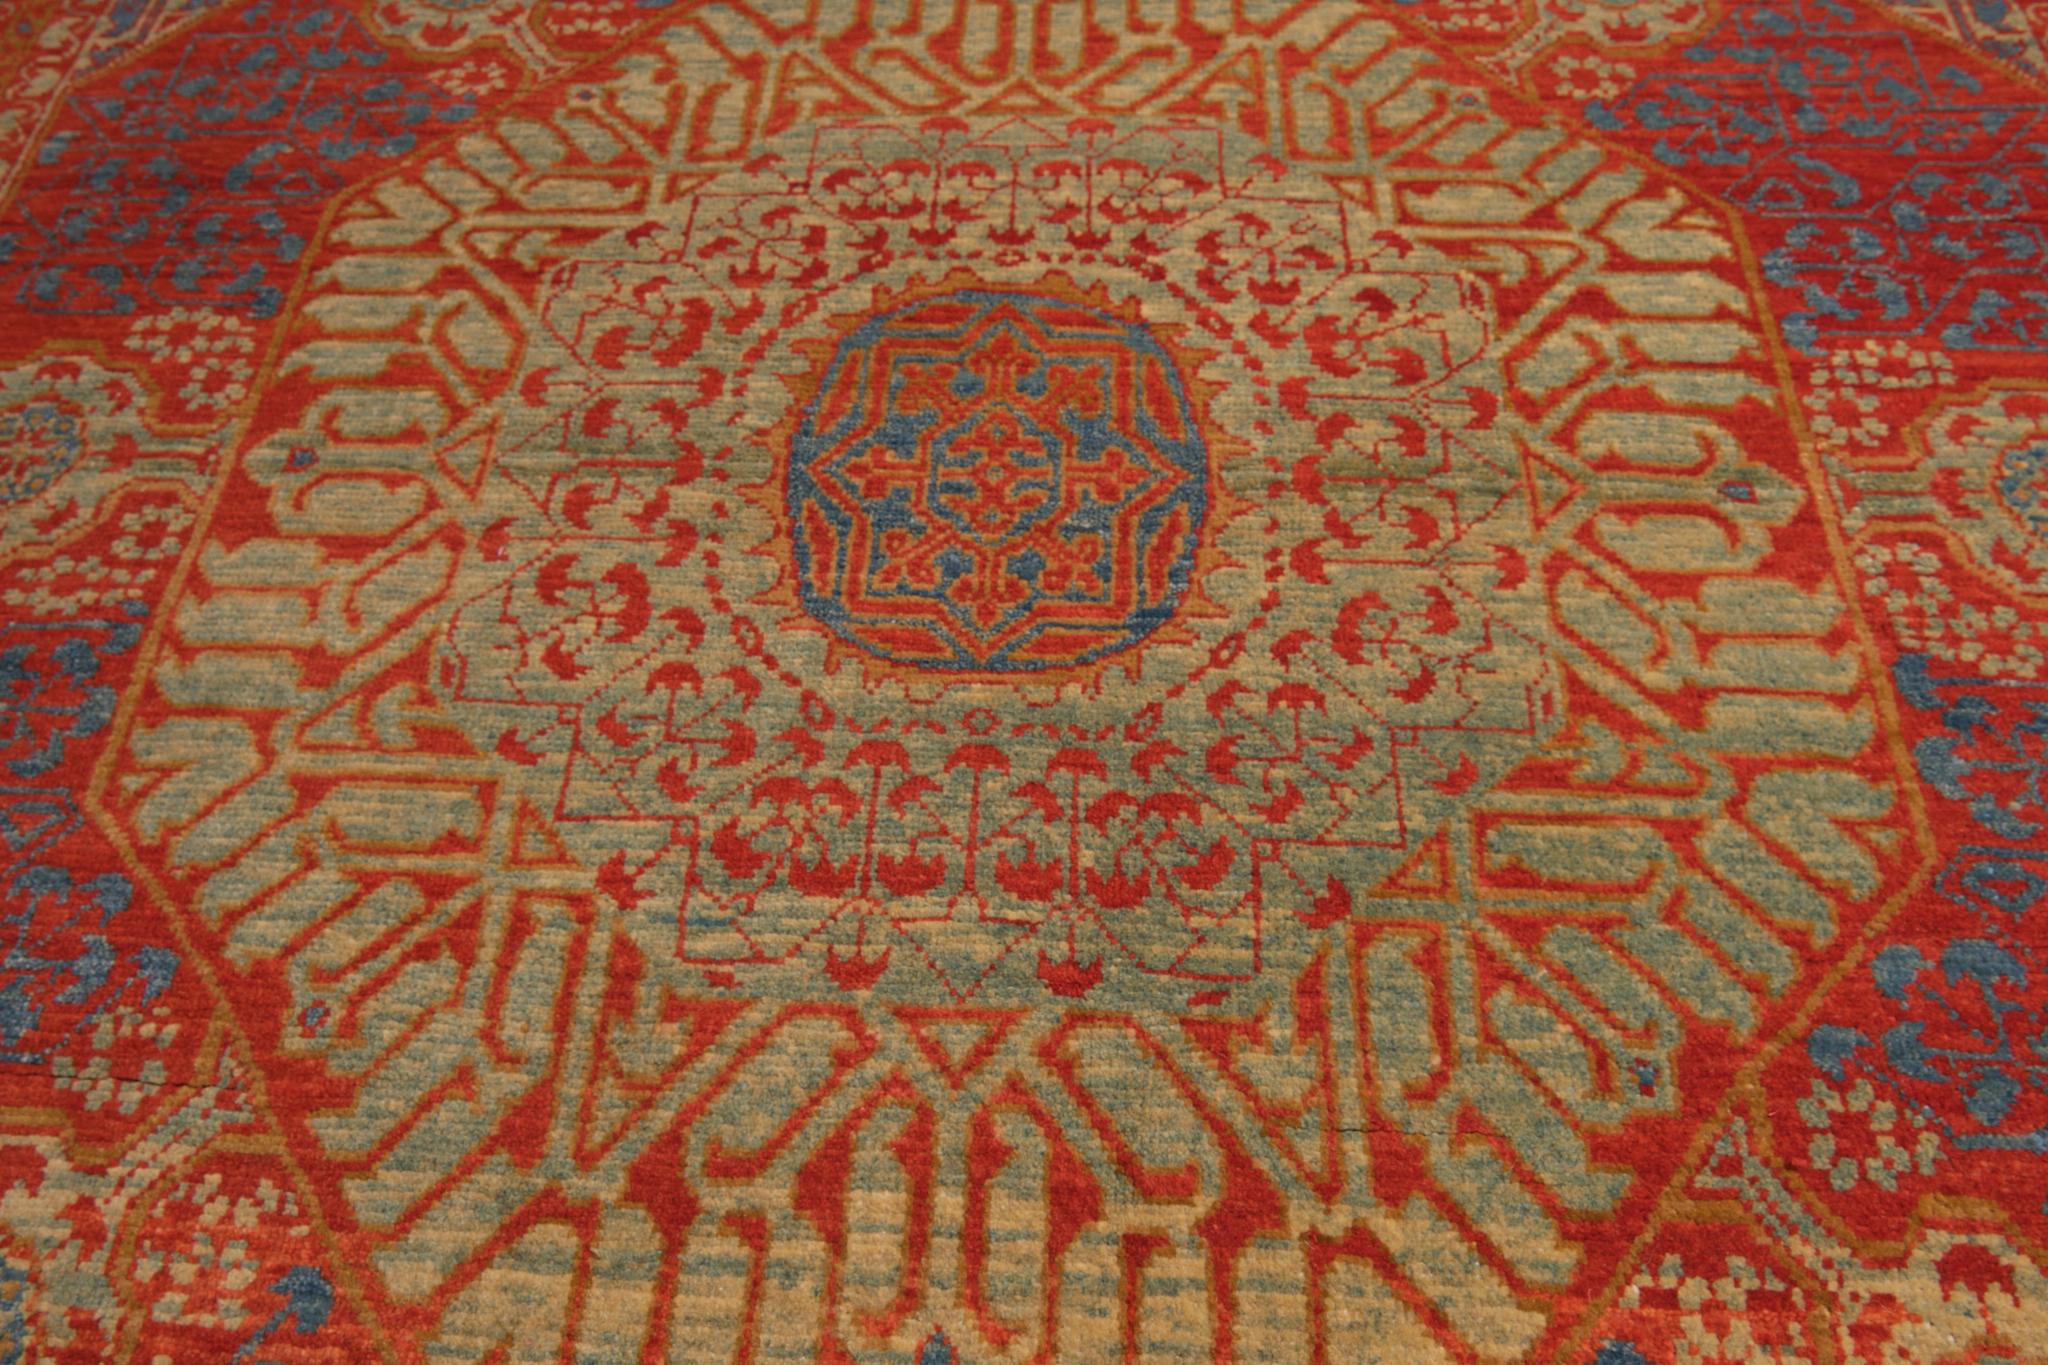 Turkish Ararat Rugs Mamluk Rug with Large Octagon 16th Cen. Antique Egypt Revival Carpet For Sale